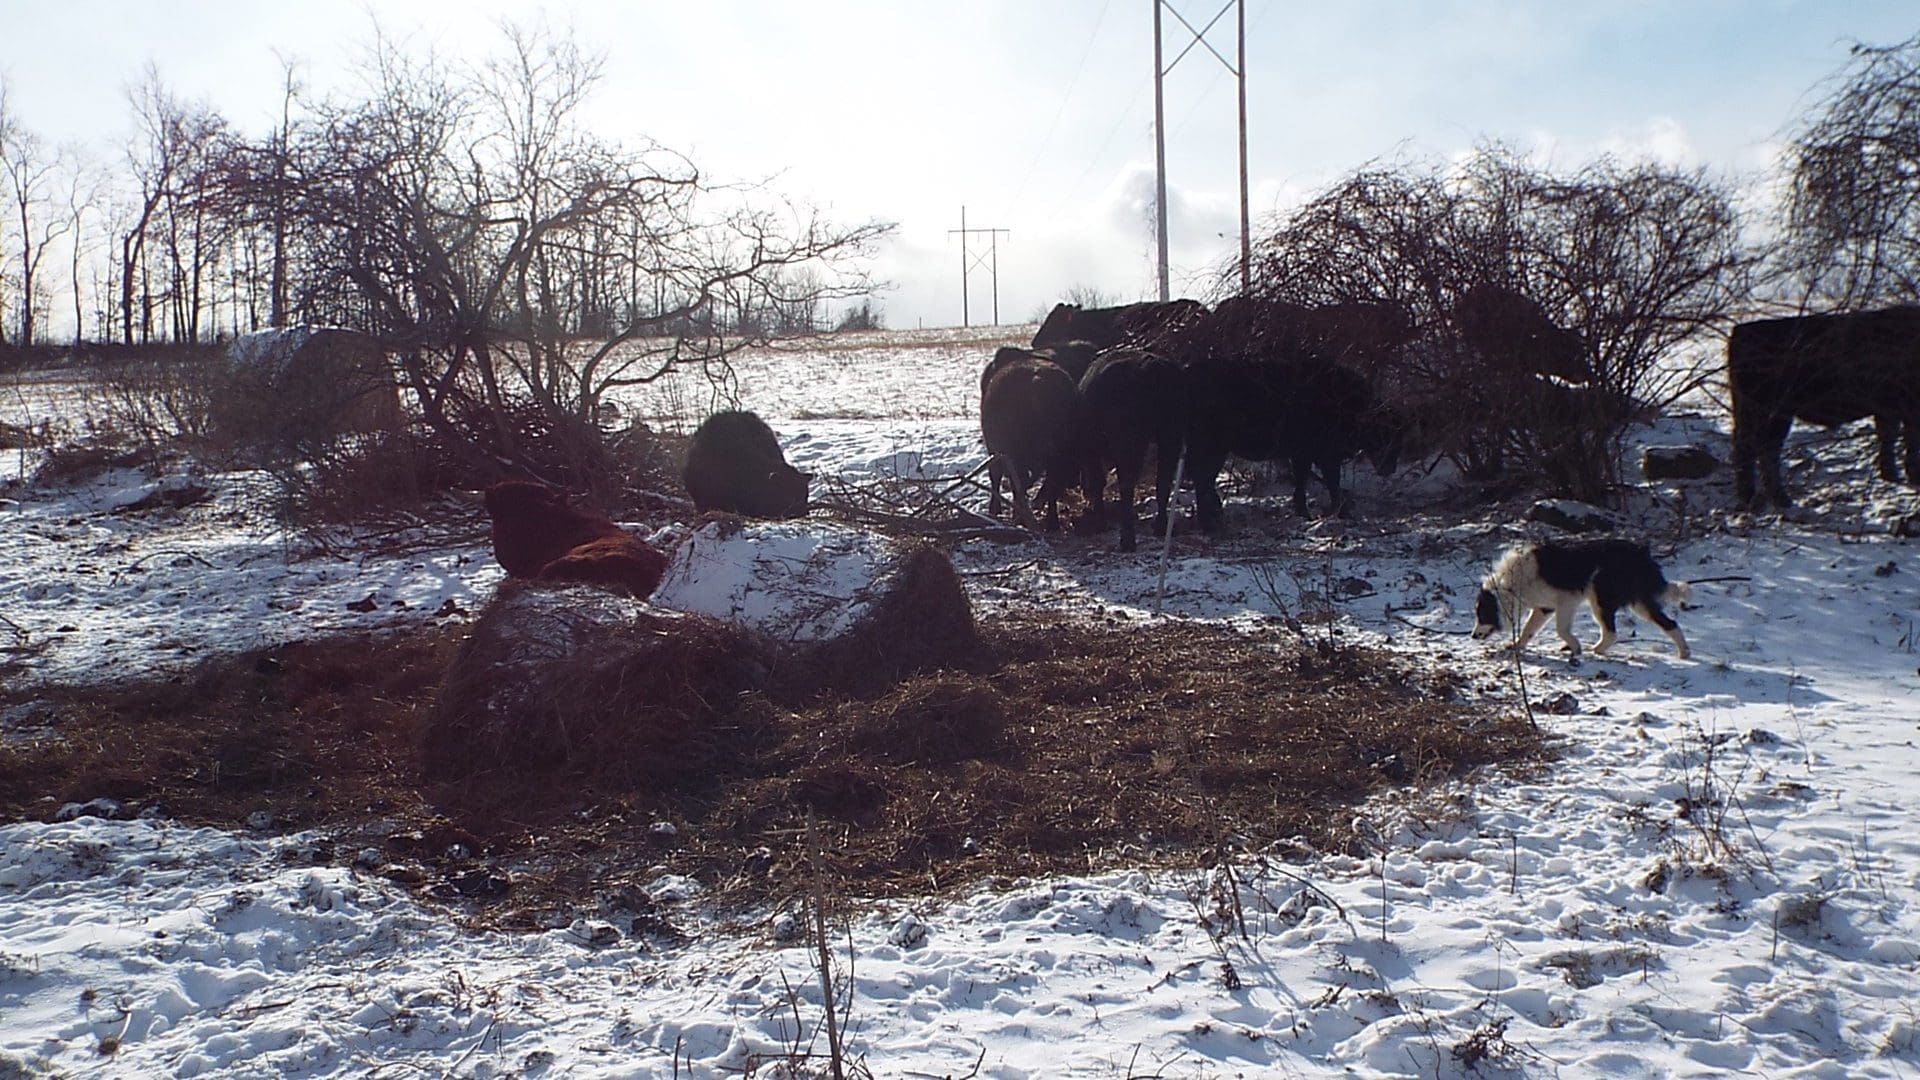 The bull is resting on the bale residue while ruminating.  Most of this pile will be gone by the next day.